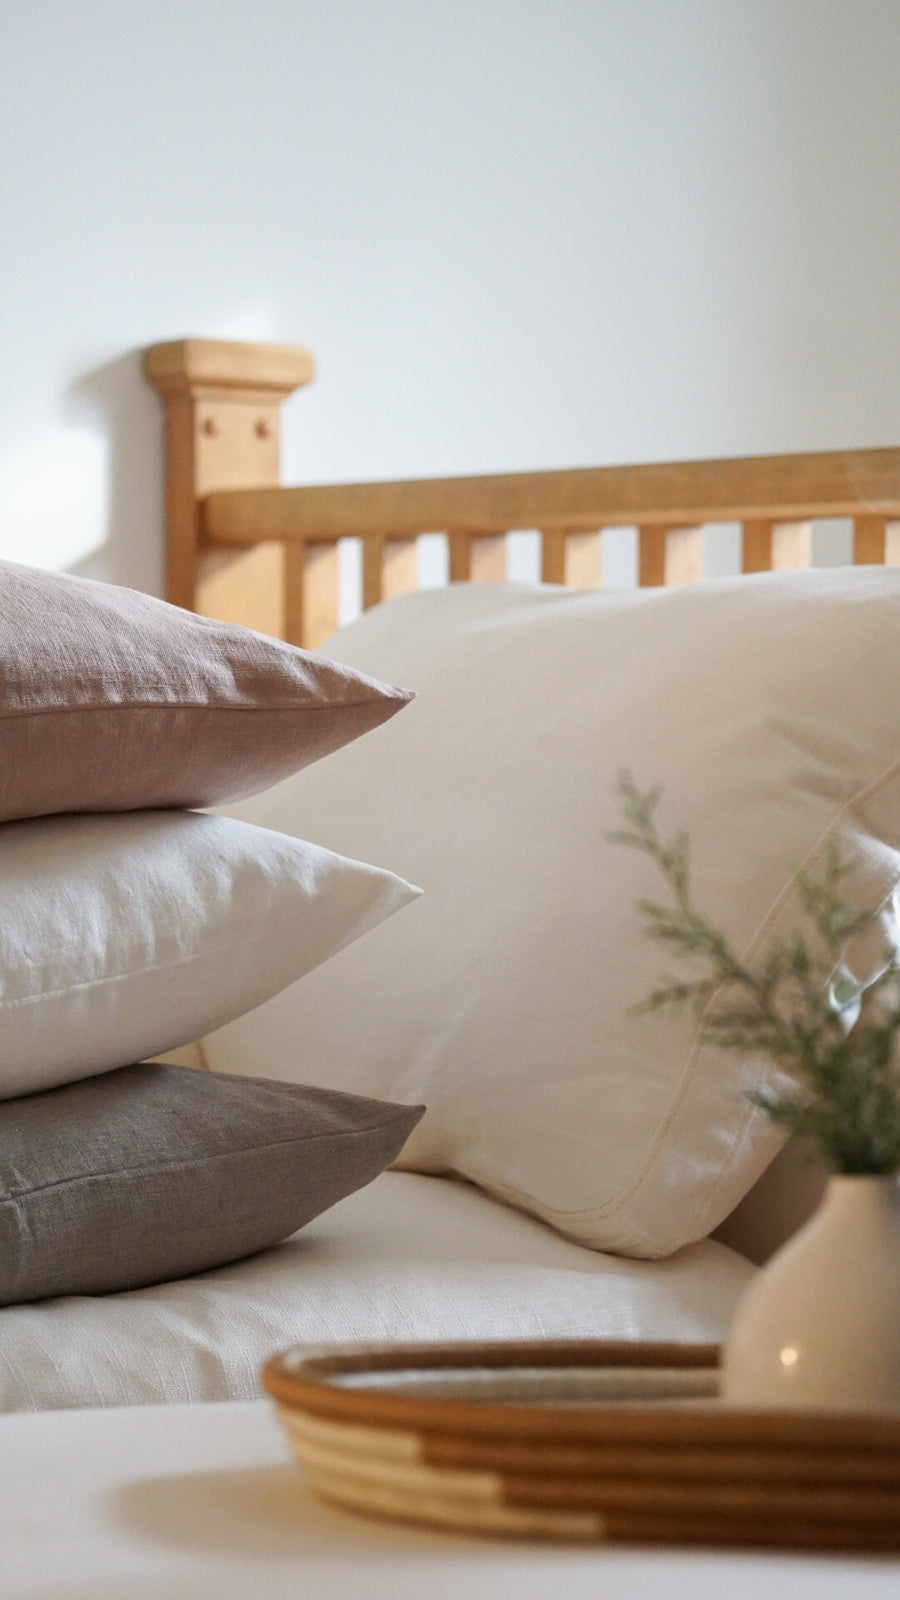 Linen Cushion Cover - Natural